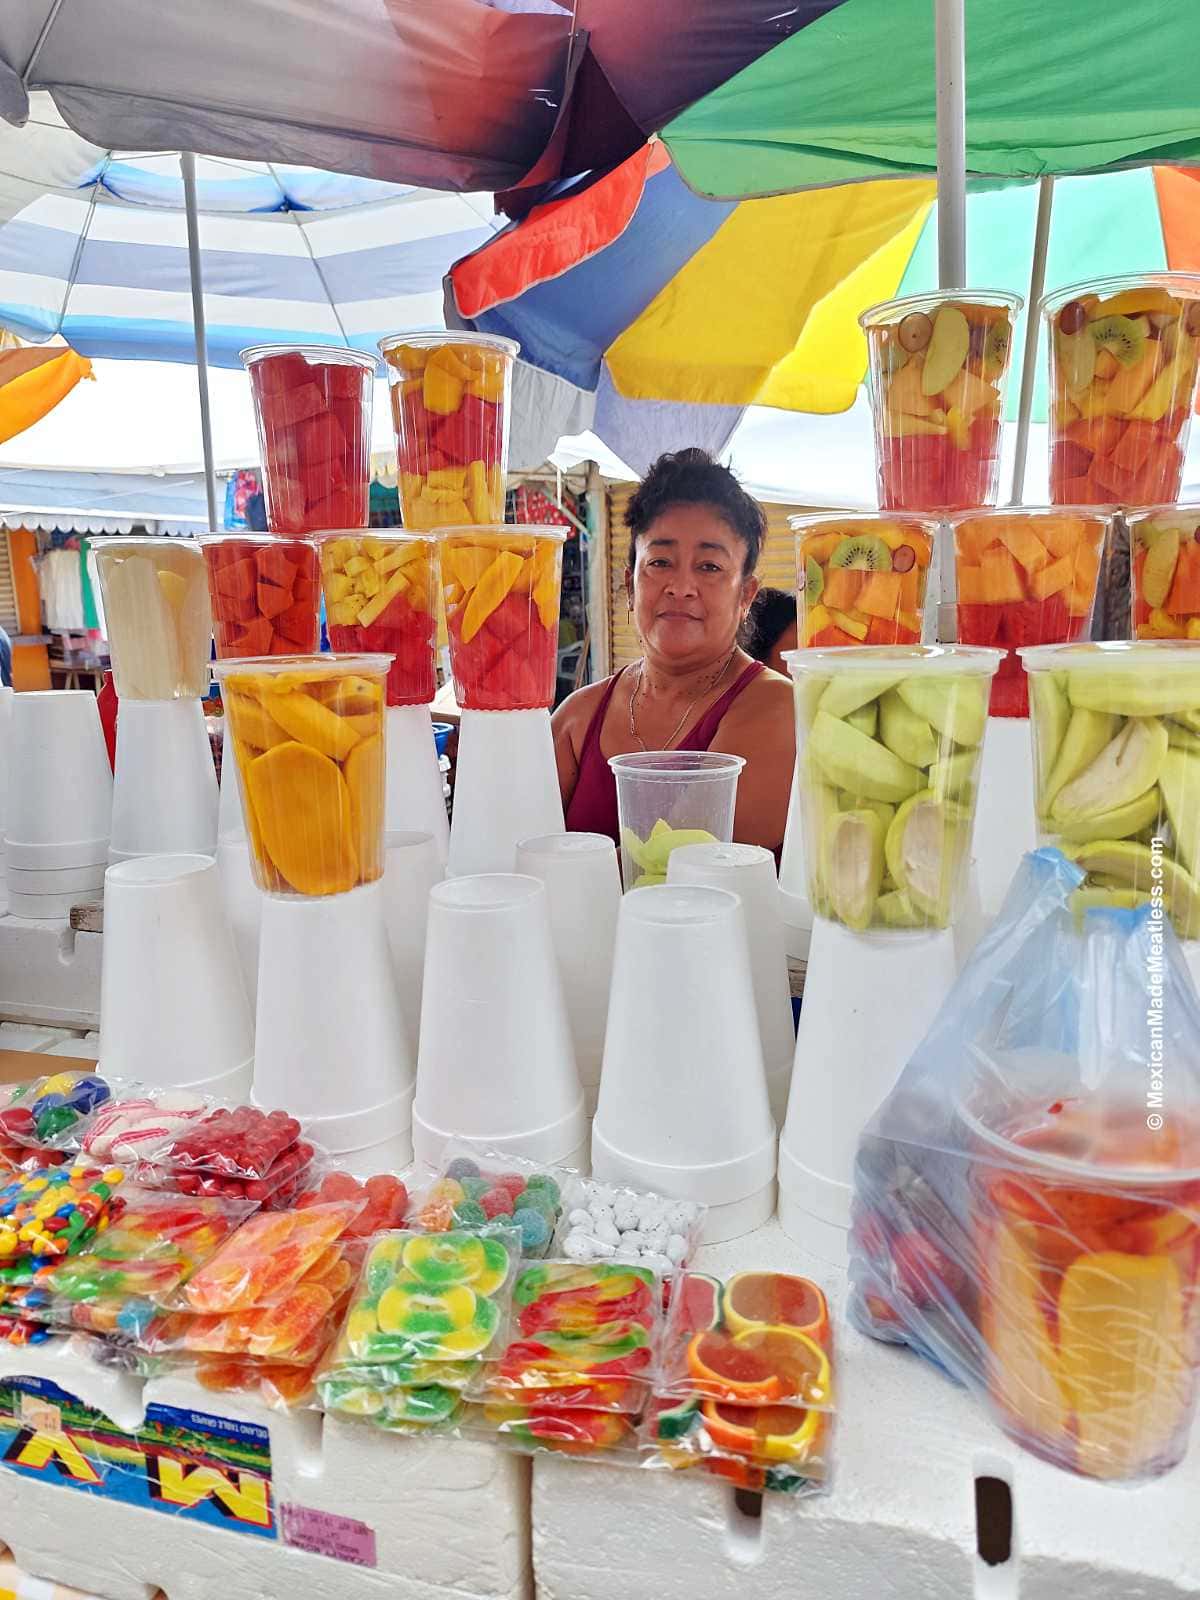 Photo of a woman vender in an open air market in Campeche Mexico selling cut up fruit.